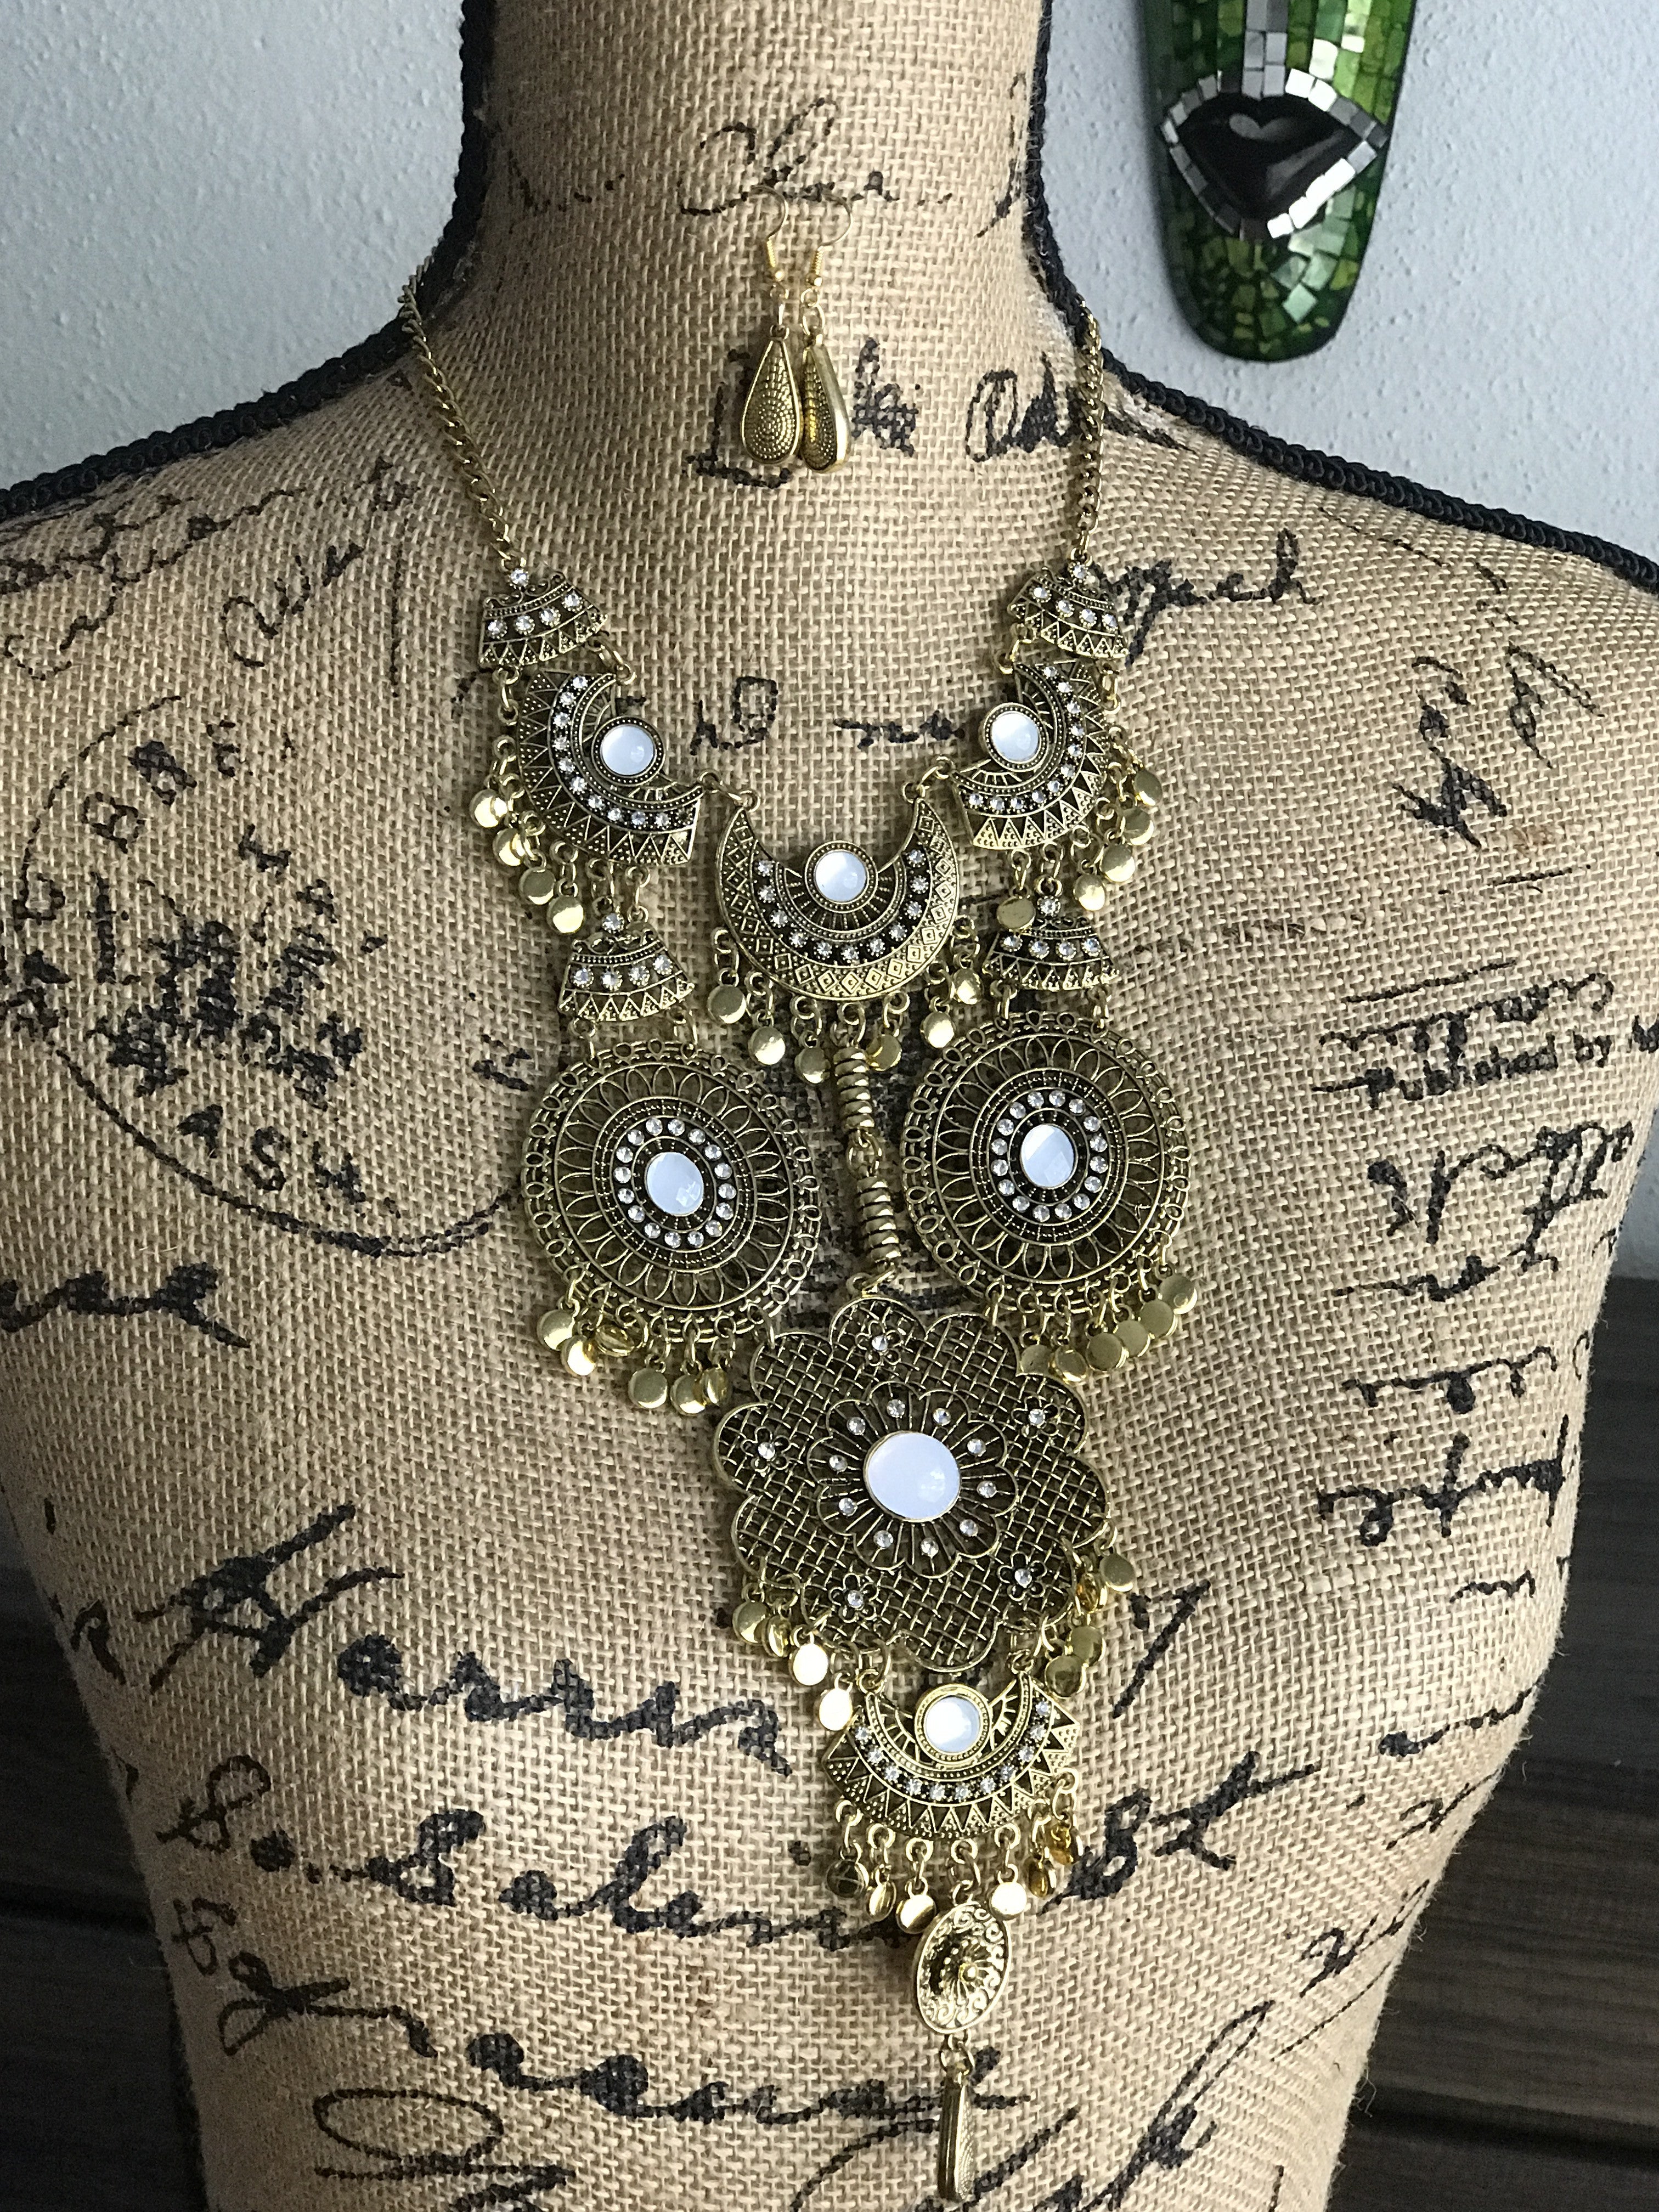 Gorgeous burnished gold bib statement necklace and earrings set